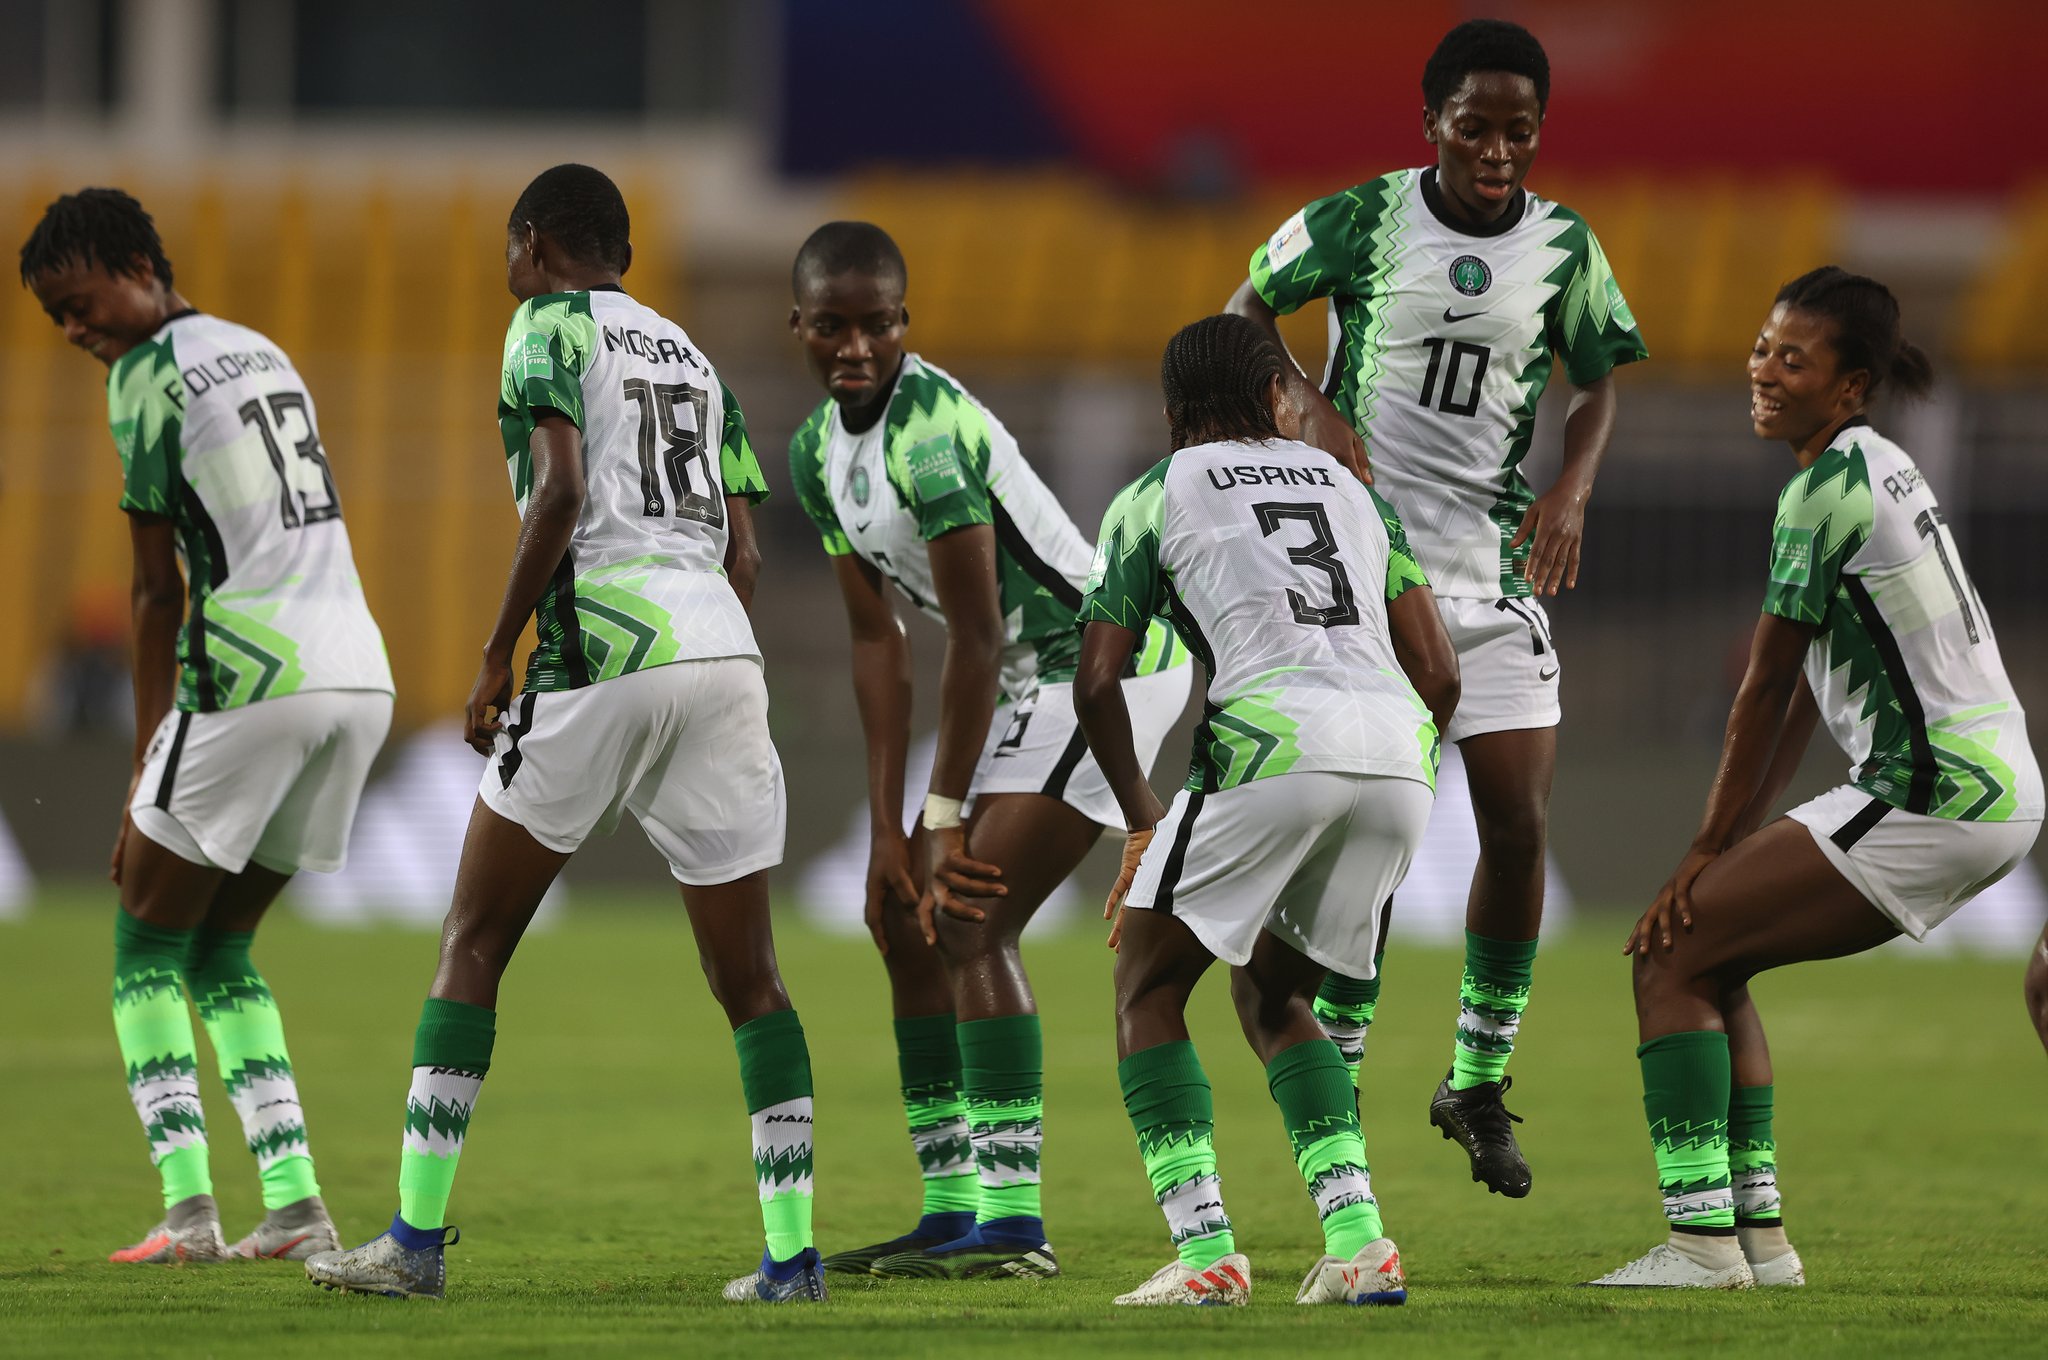 Flamingos of Nigeria don qualify for Women’s U-17 World Cup semi final for the first time in history